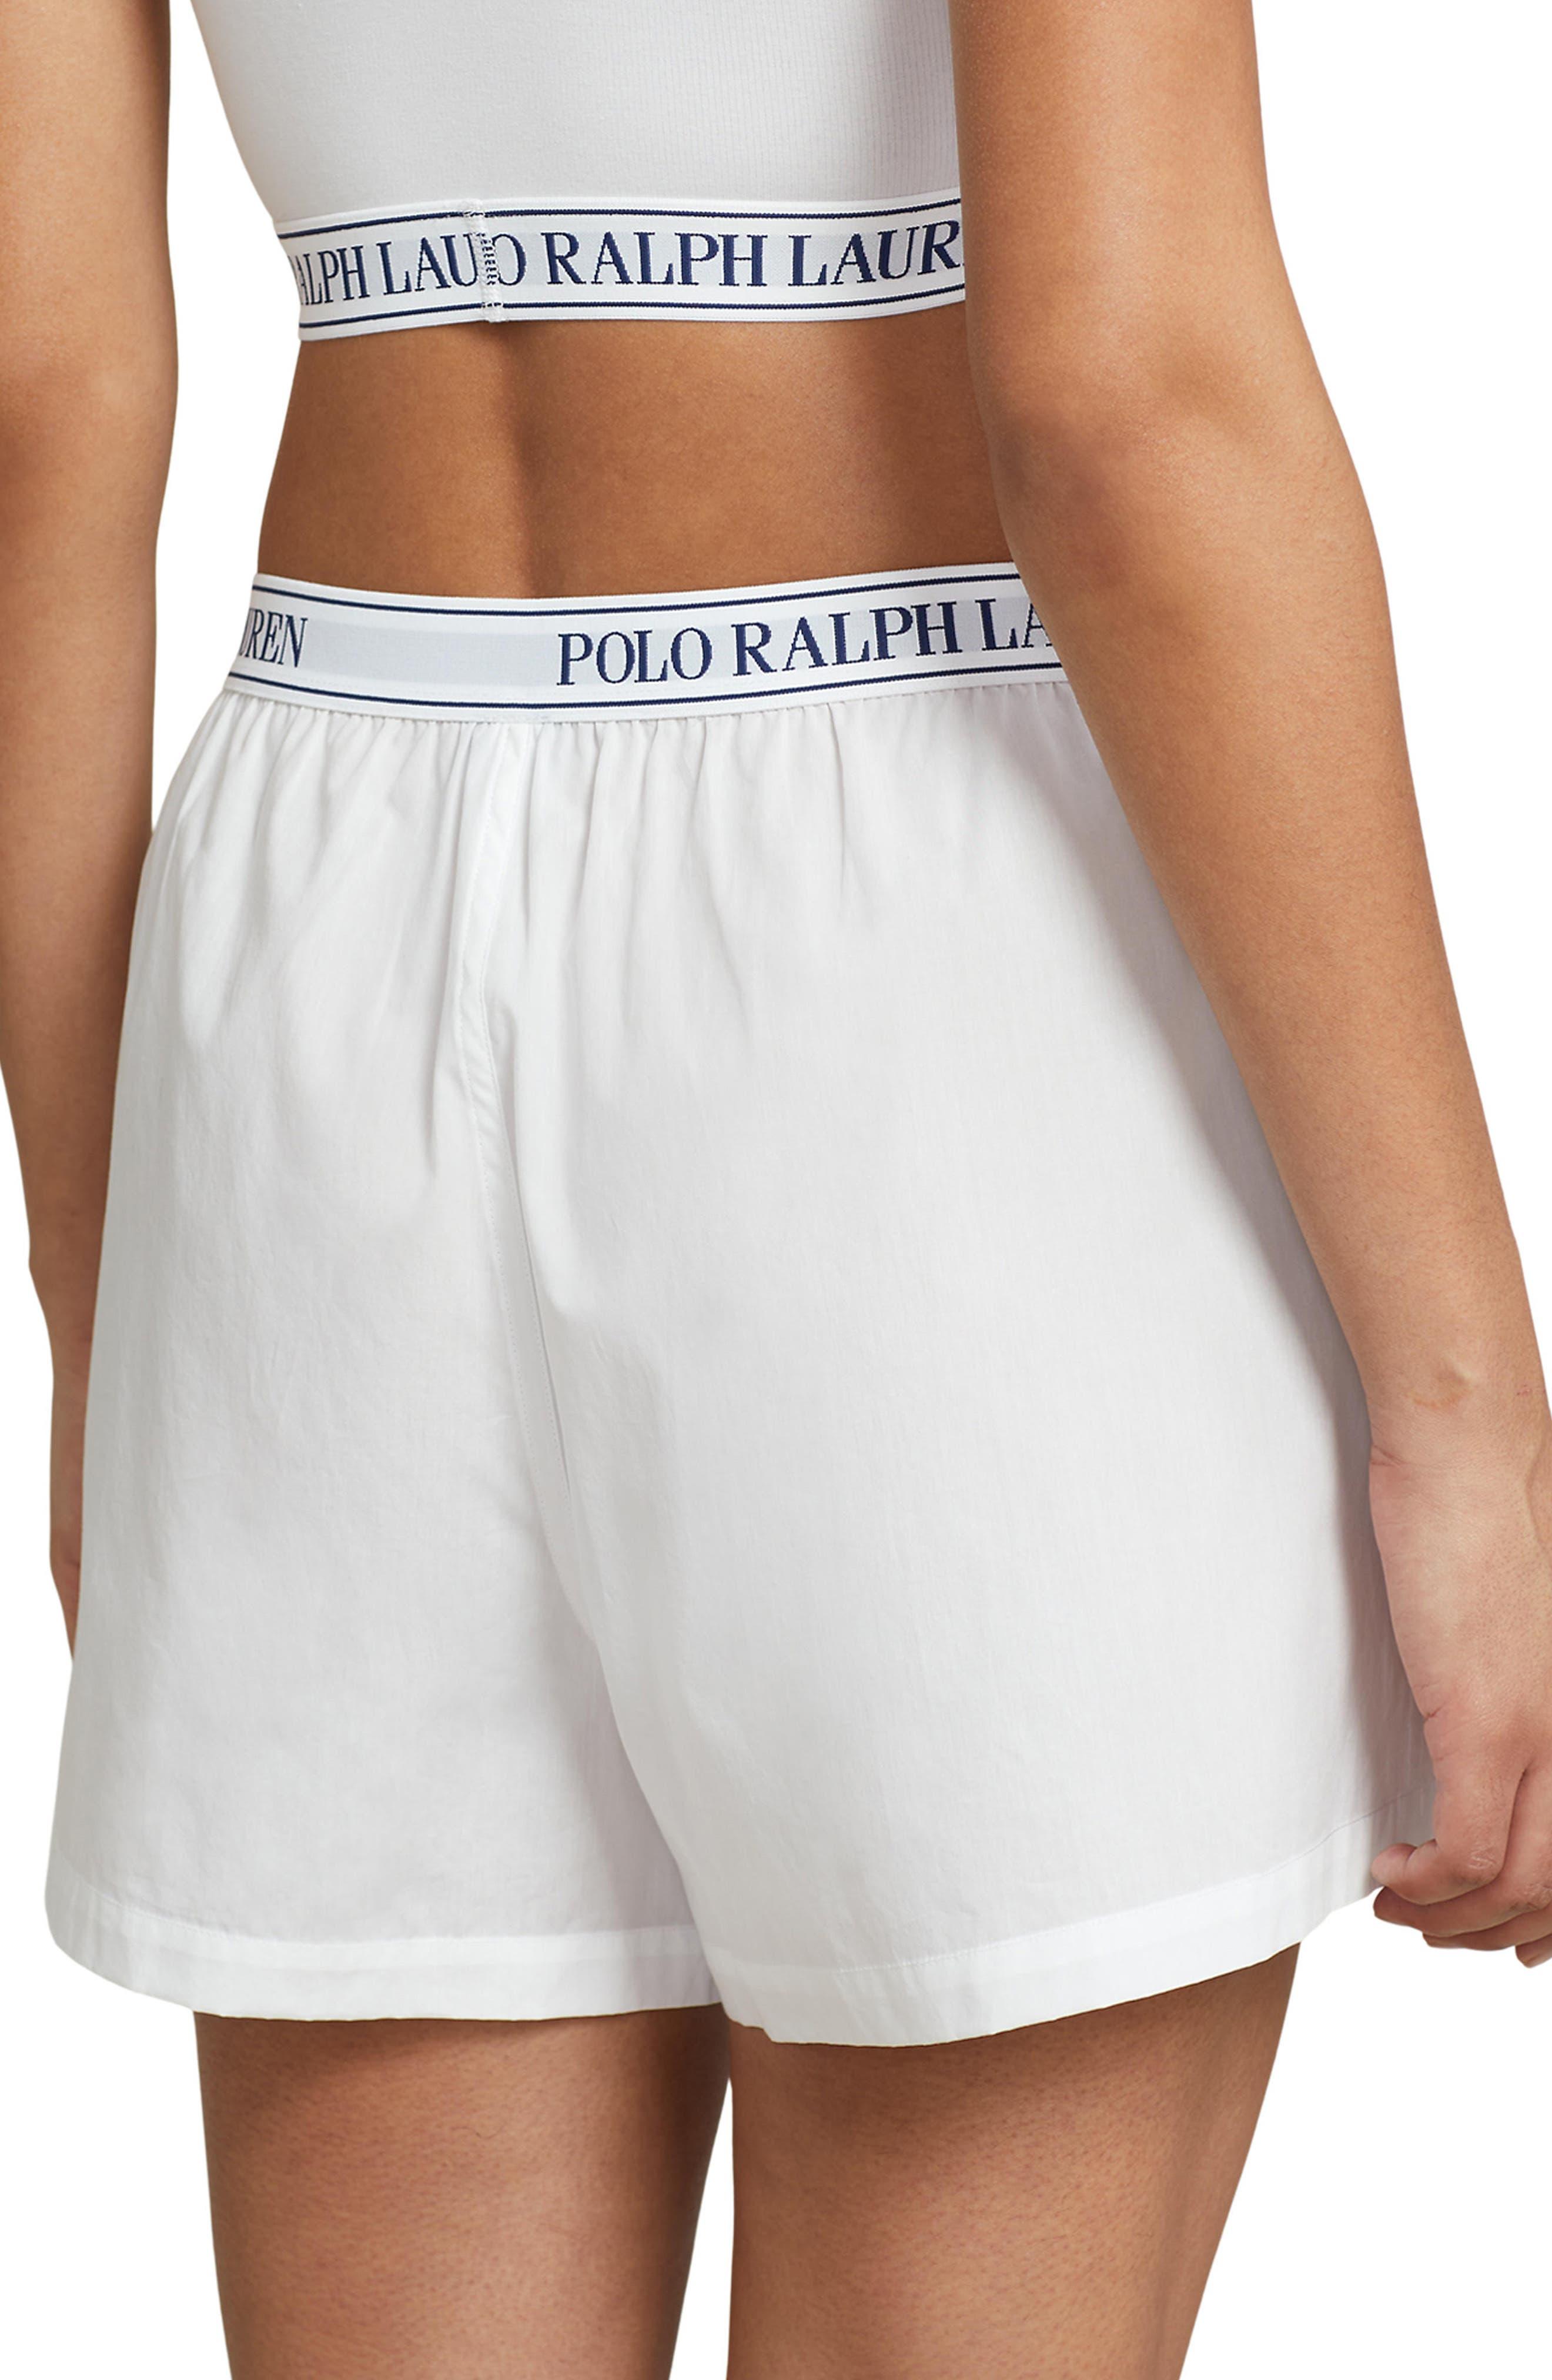 Polo Ralph Lauren Boxer Pajama Shorts in White | Lyst